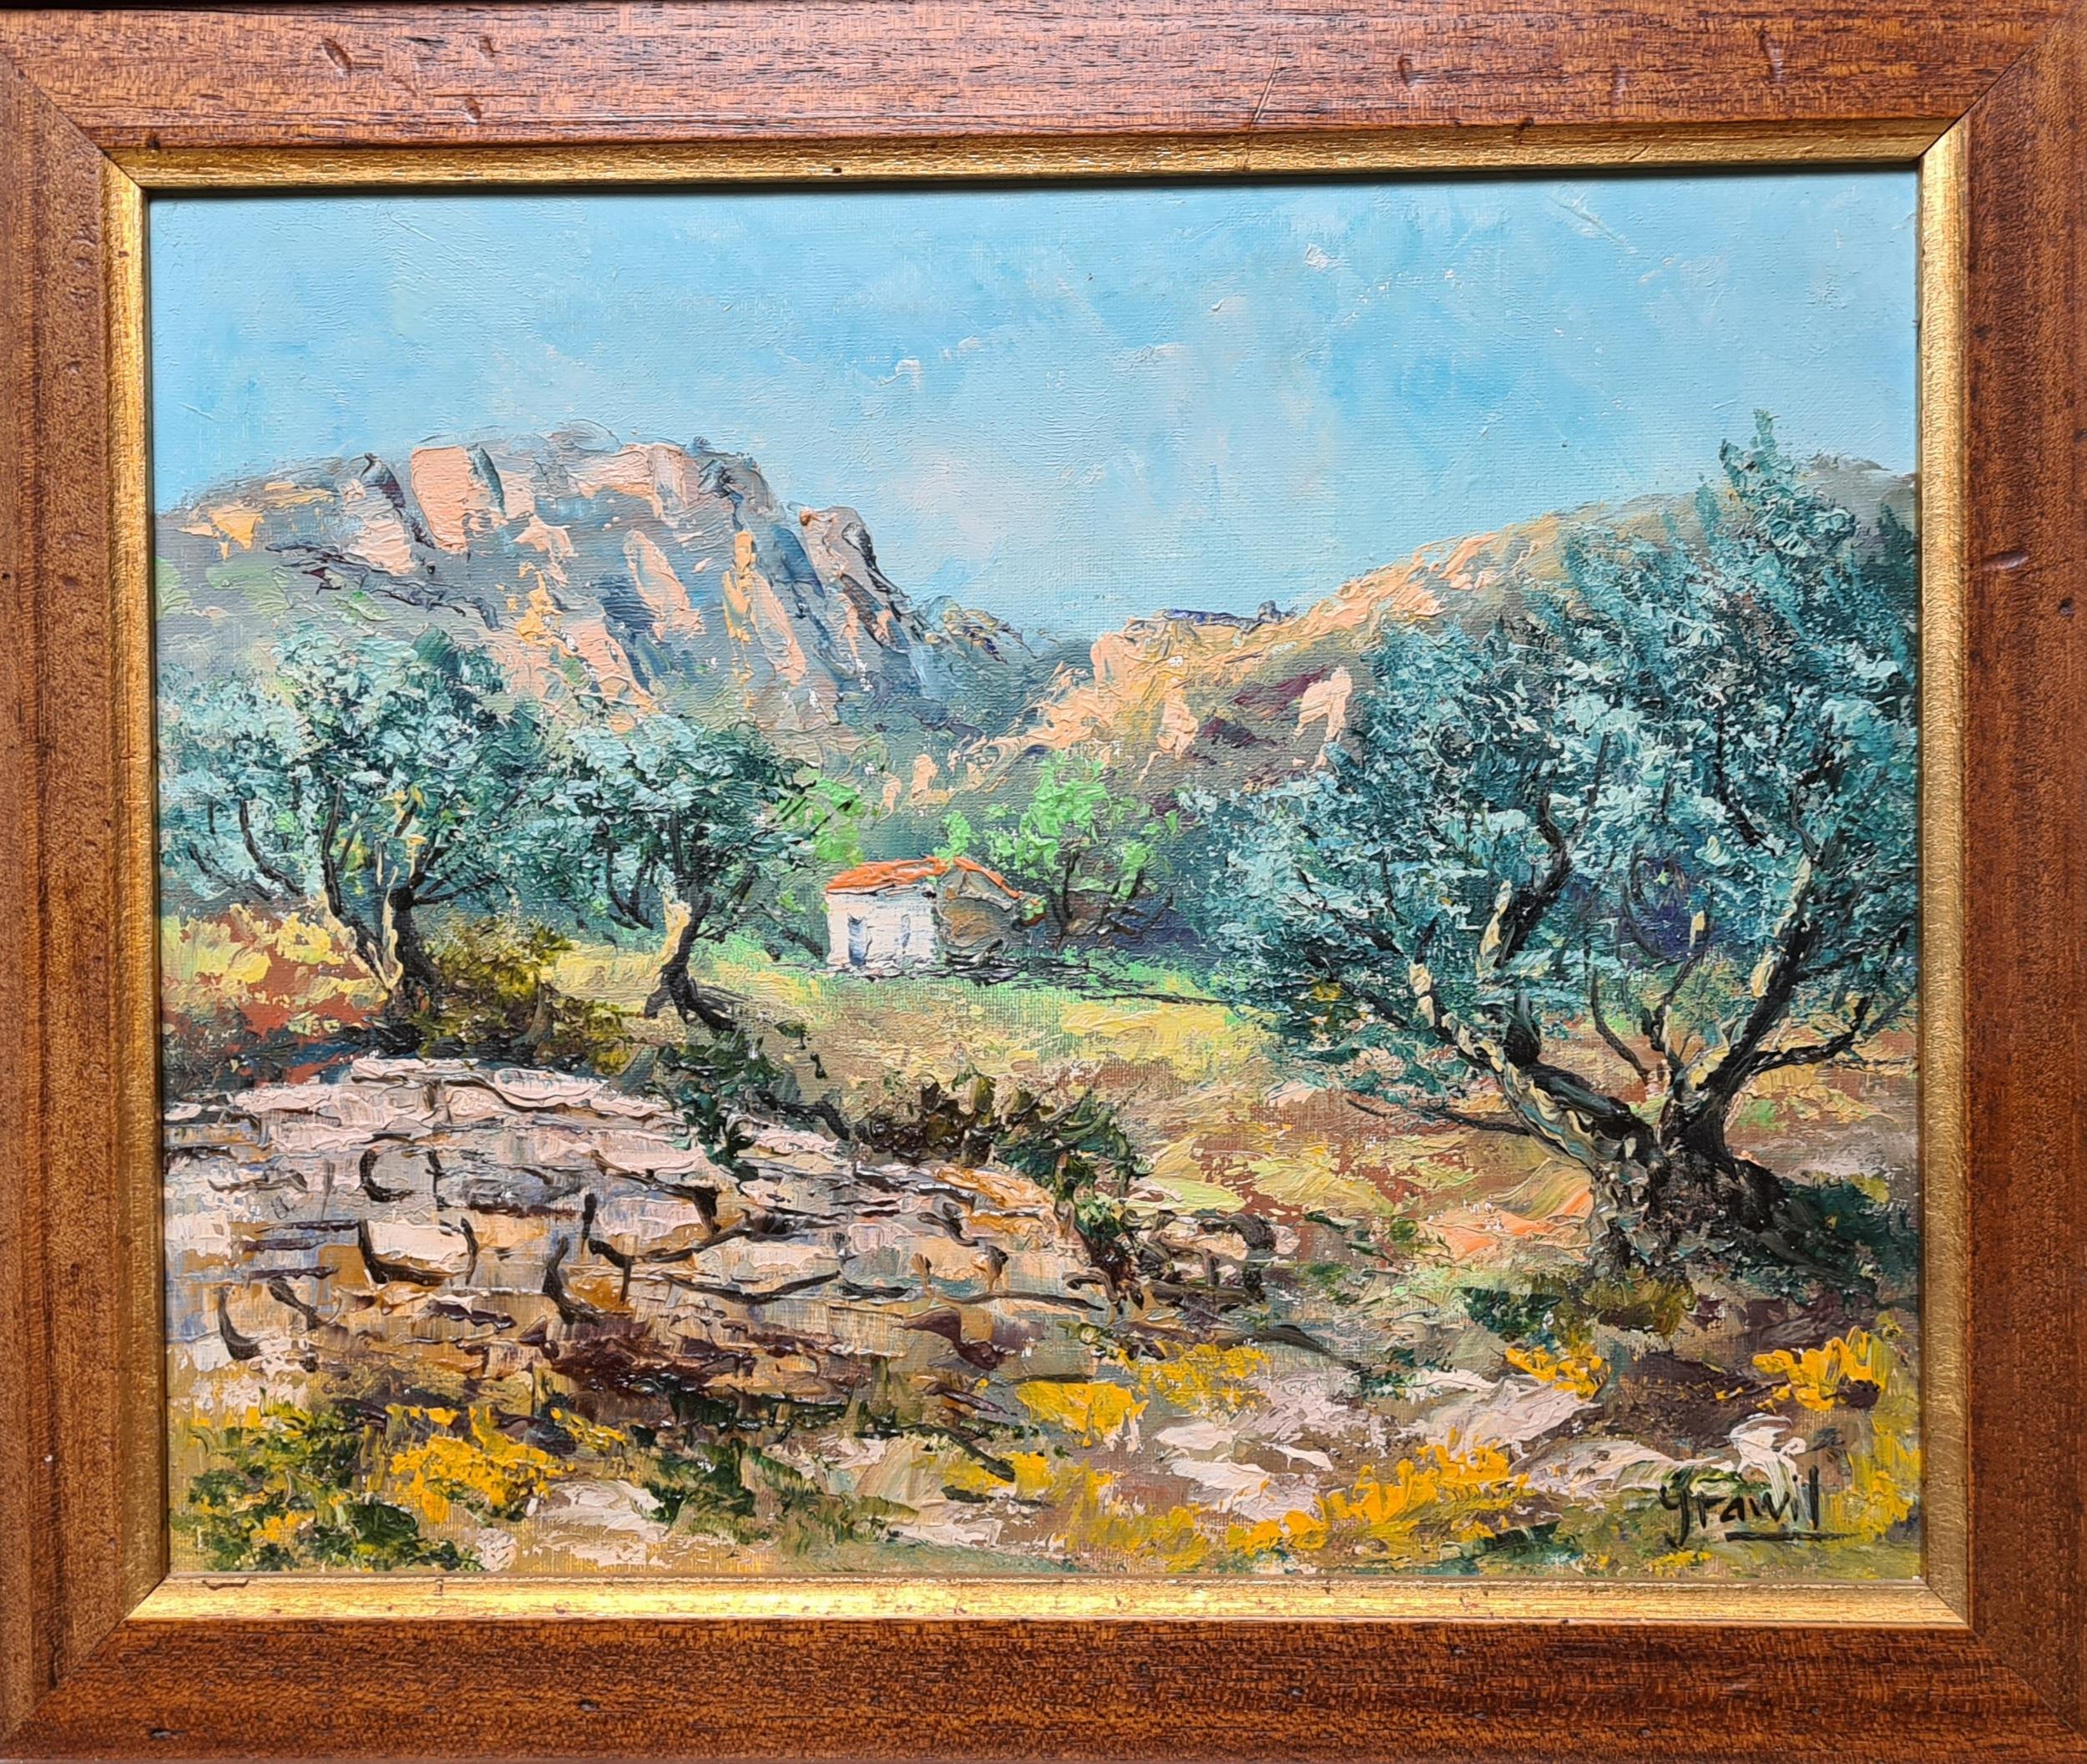 Maurice Schwab aka 'Grawil' Landscape Painting - Le Cabanon Provençal et son Oliveraie, French Country Cottage in an Olive Grove